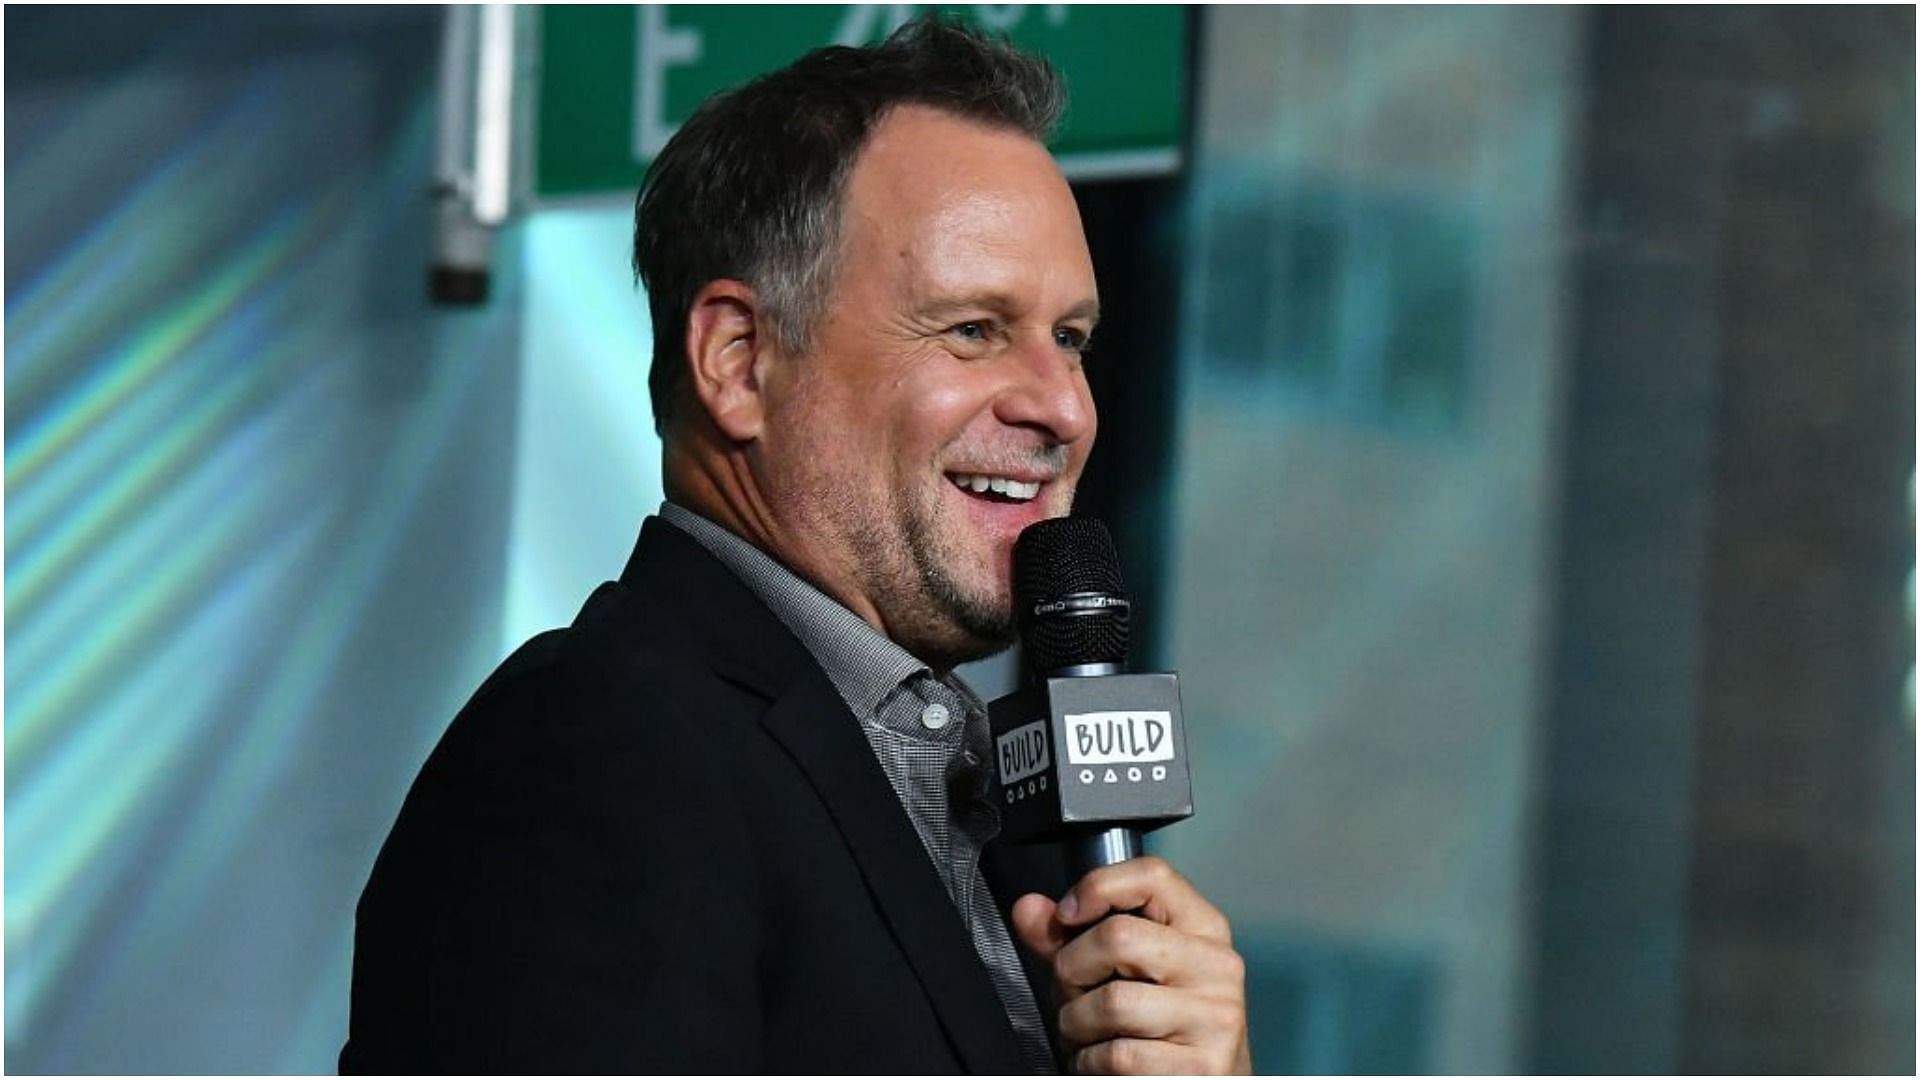 David Coulier is an actor, stand-up comedian, impressionist, and television host (Image via Slaven Vlasic/Getty Images)